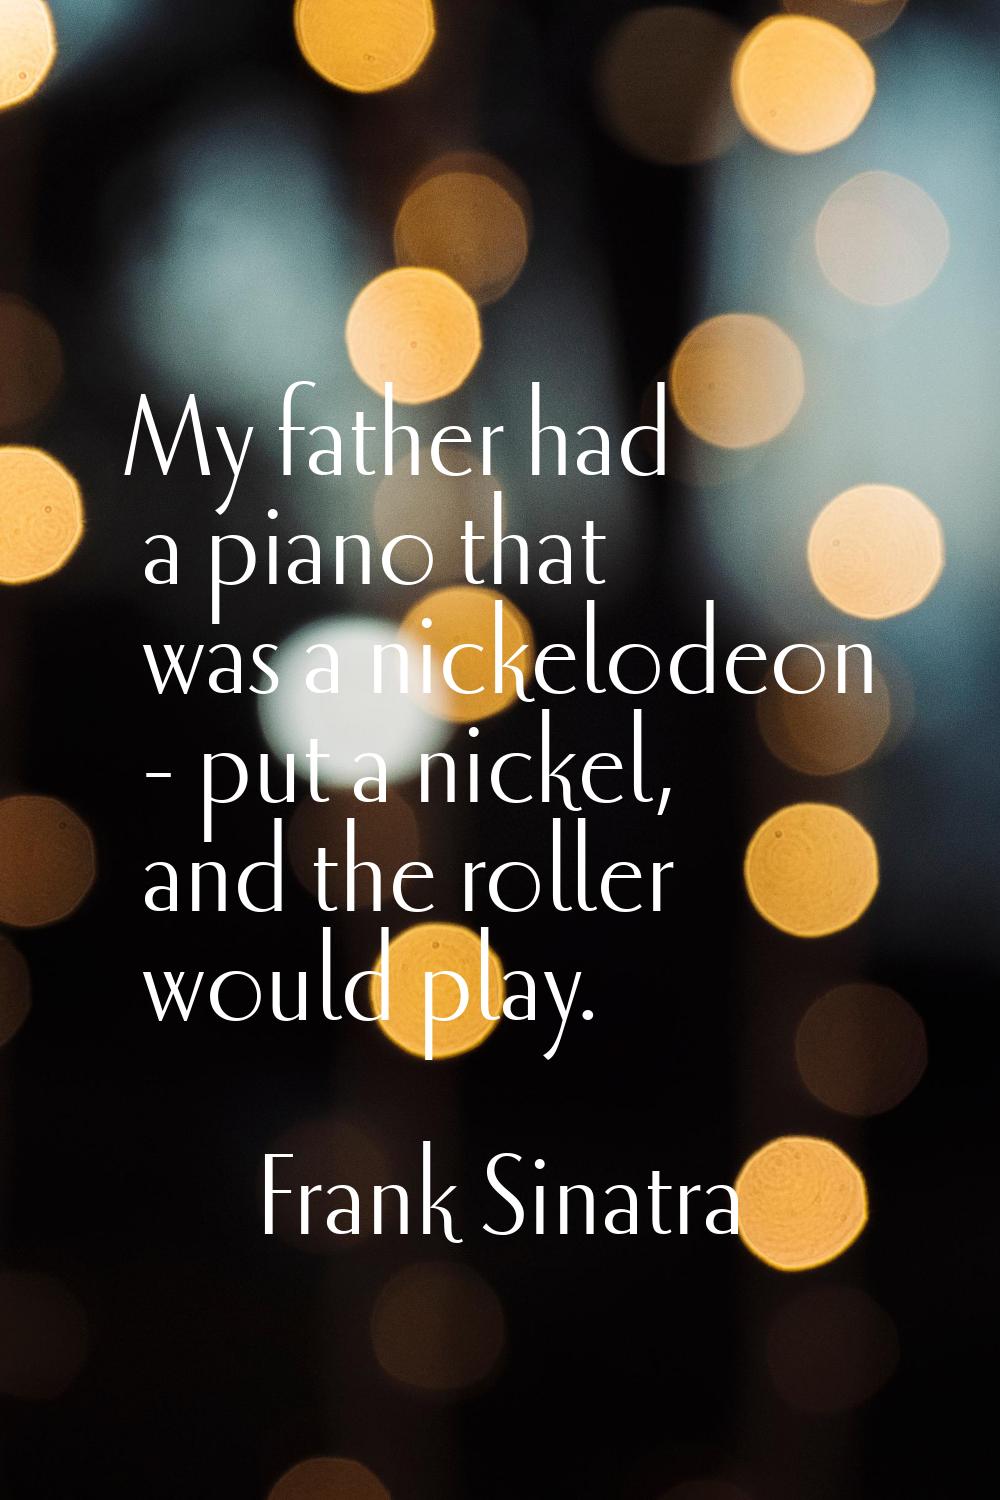 My father had a piano that was a nickelodeon - put a nickel, and the roller would play.